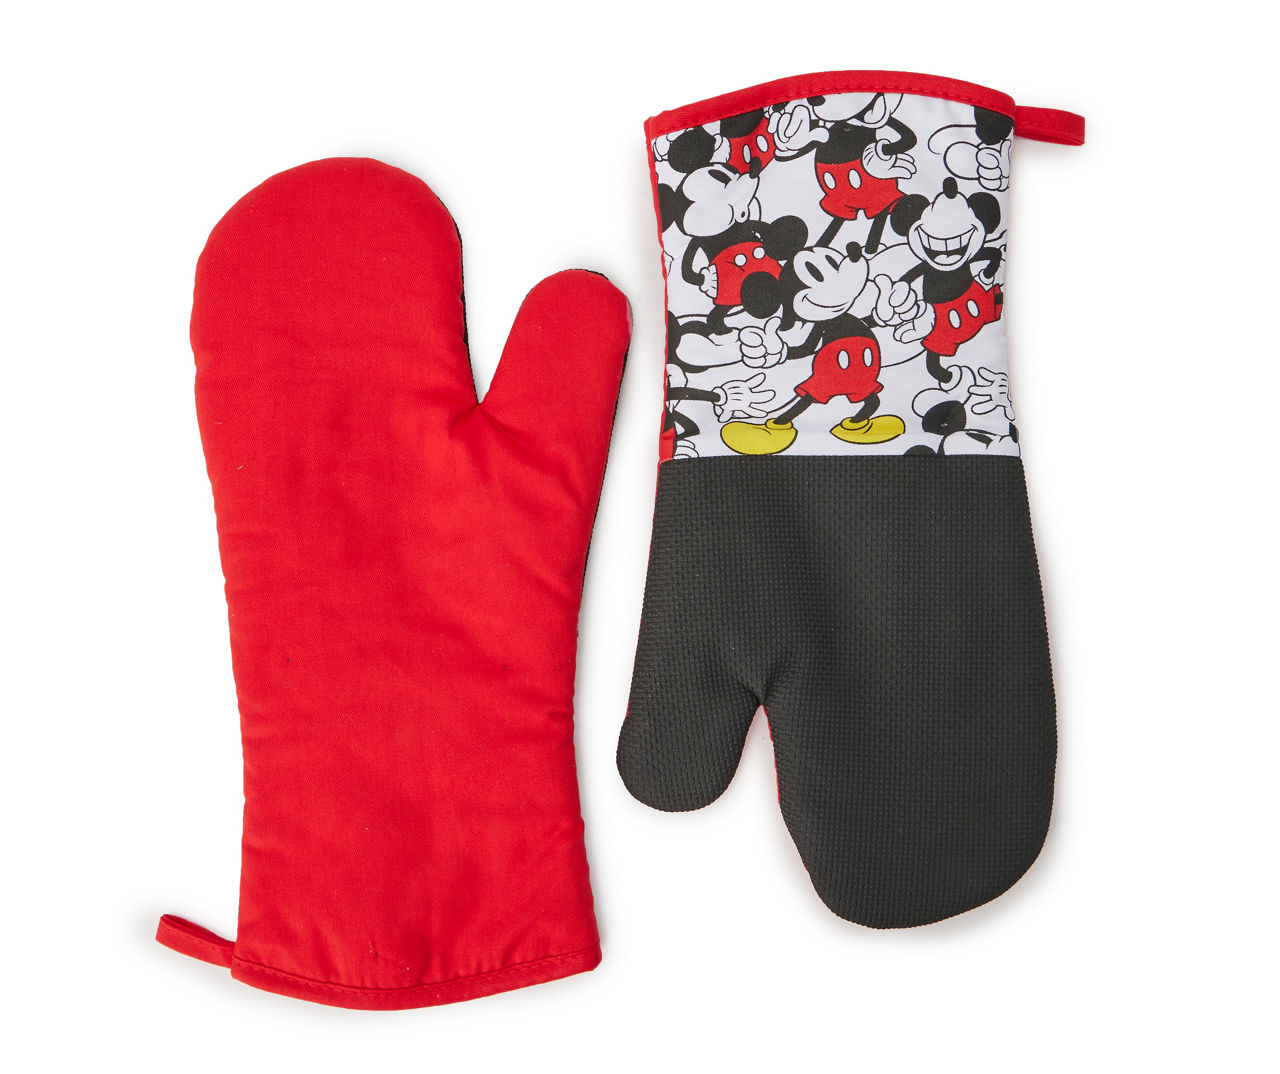 2pcs/set Disney Mickey Mouse Oven Mitts Coasters Suit Cute Animation Pure  Cotton Heat Insulation Gloves